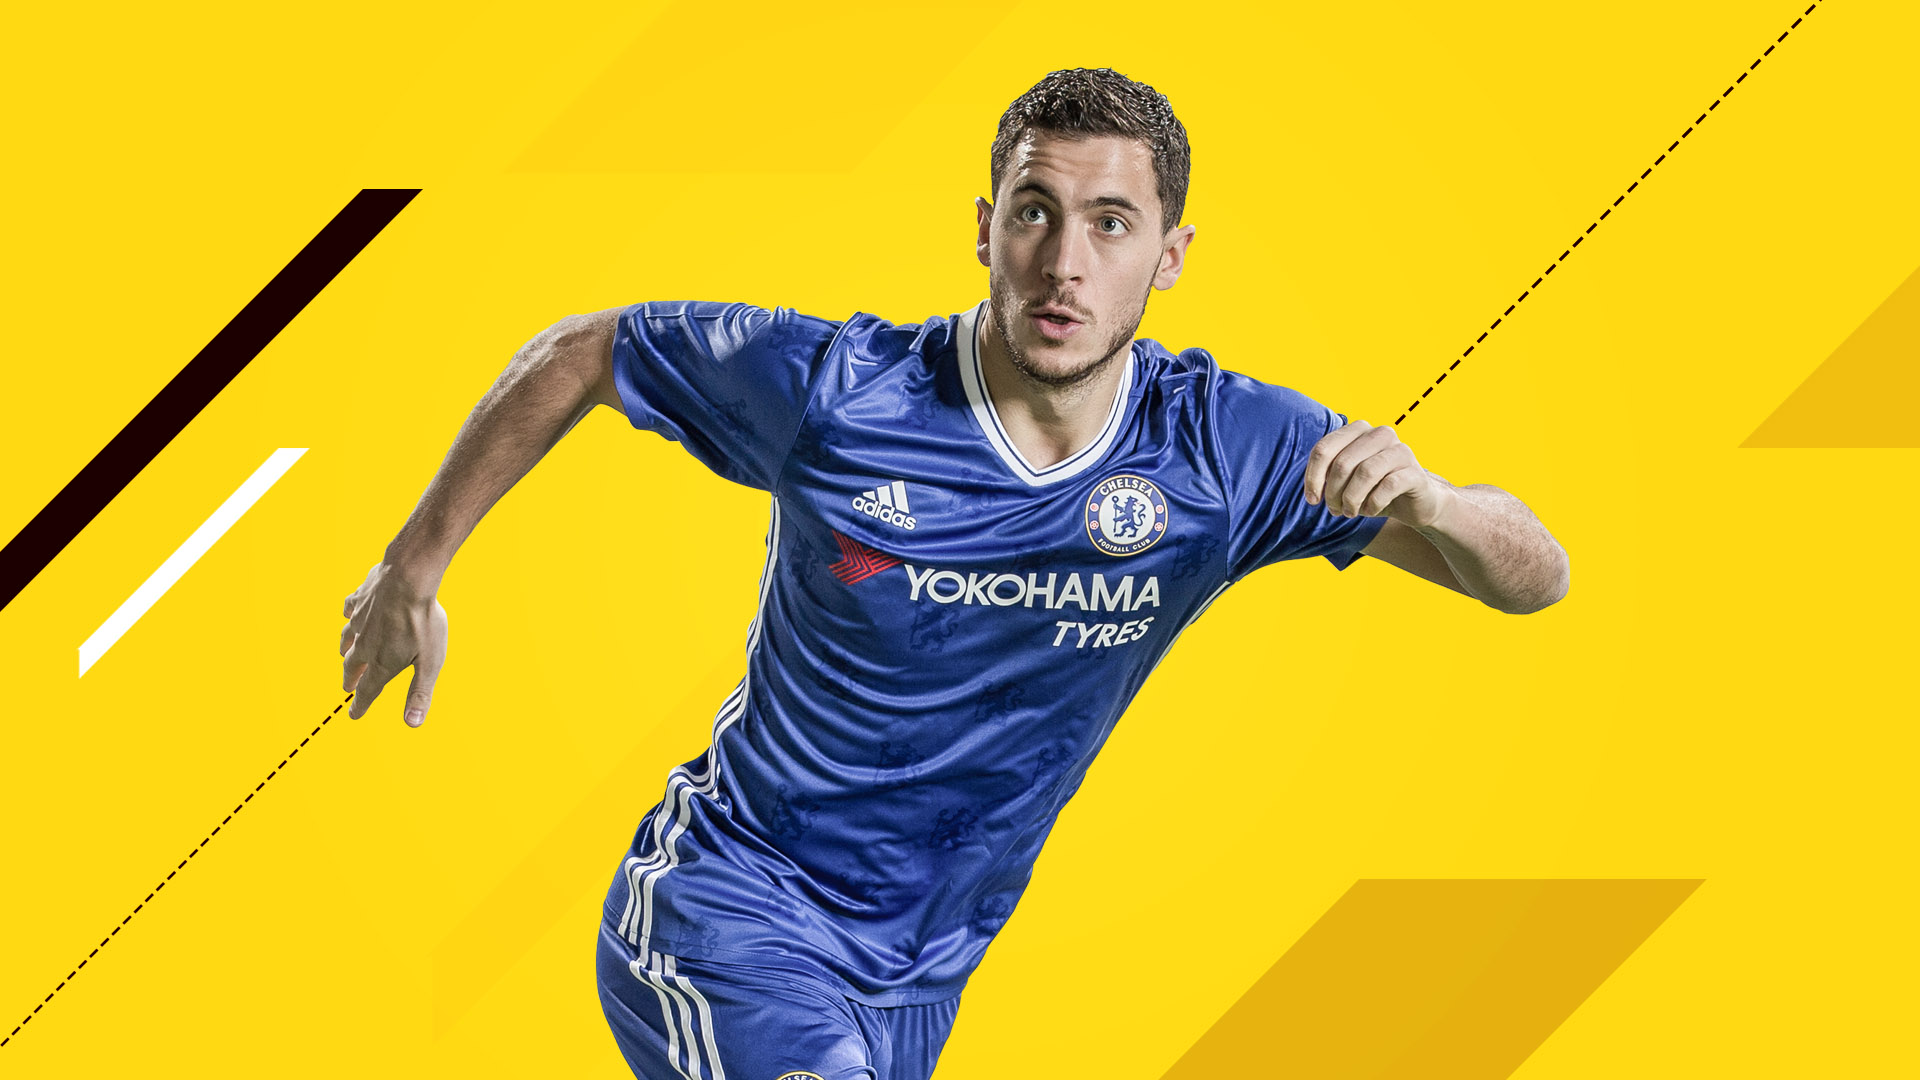 Fifa17 Wallpaper Hazard - Fifa 17 Wallpaper Hazard , HD Wallpaper & Backgrounds